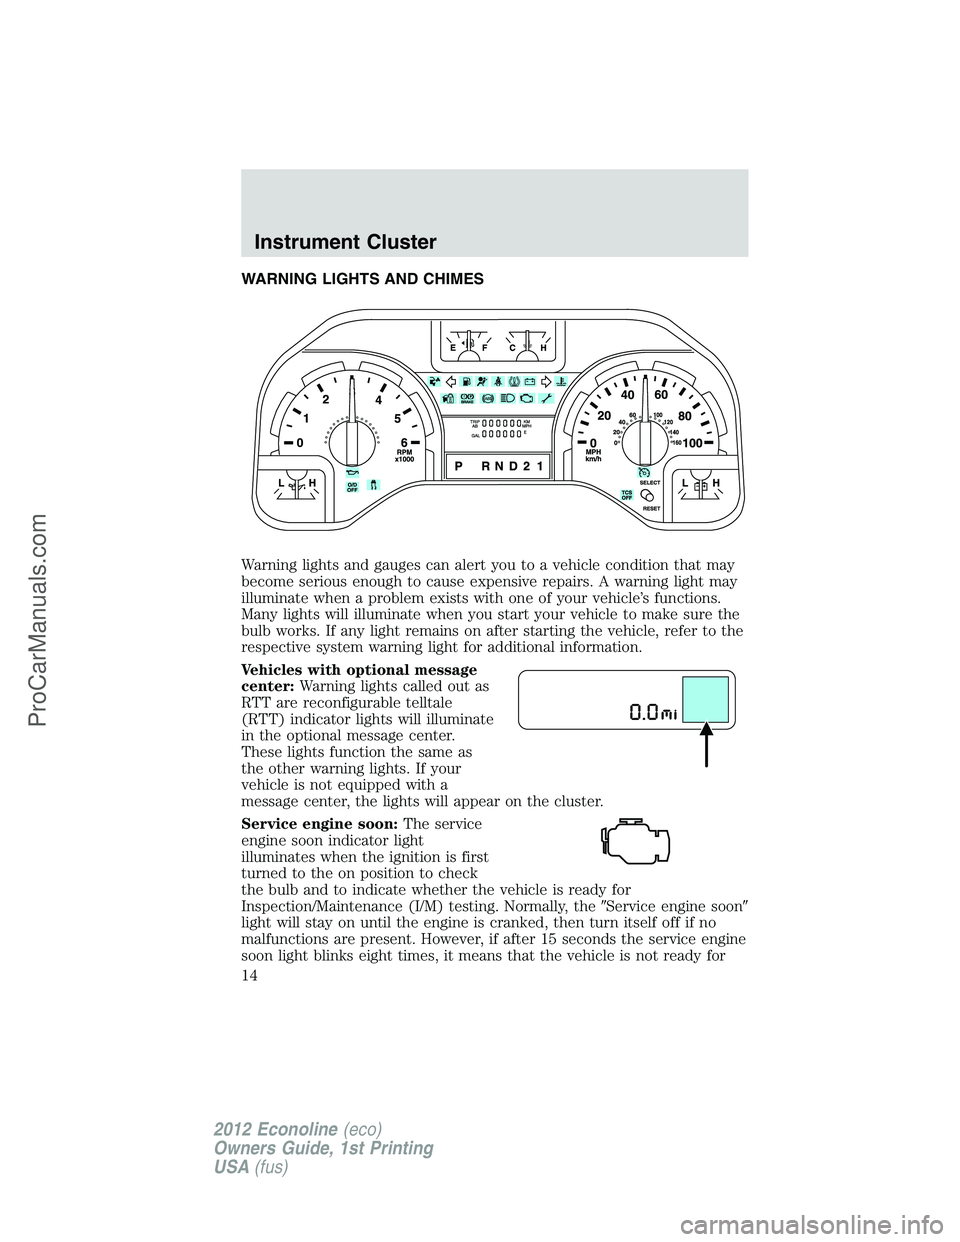 FORD E-250 2012 User Guide WARNING LIGHTS AND CHIMES
Warning lights and gauges can alert you to a vehicle condition that may
become serious enough to cause expensive repairs. A warning light may
illuminate when a problem exists